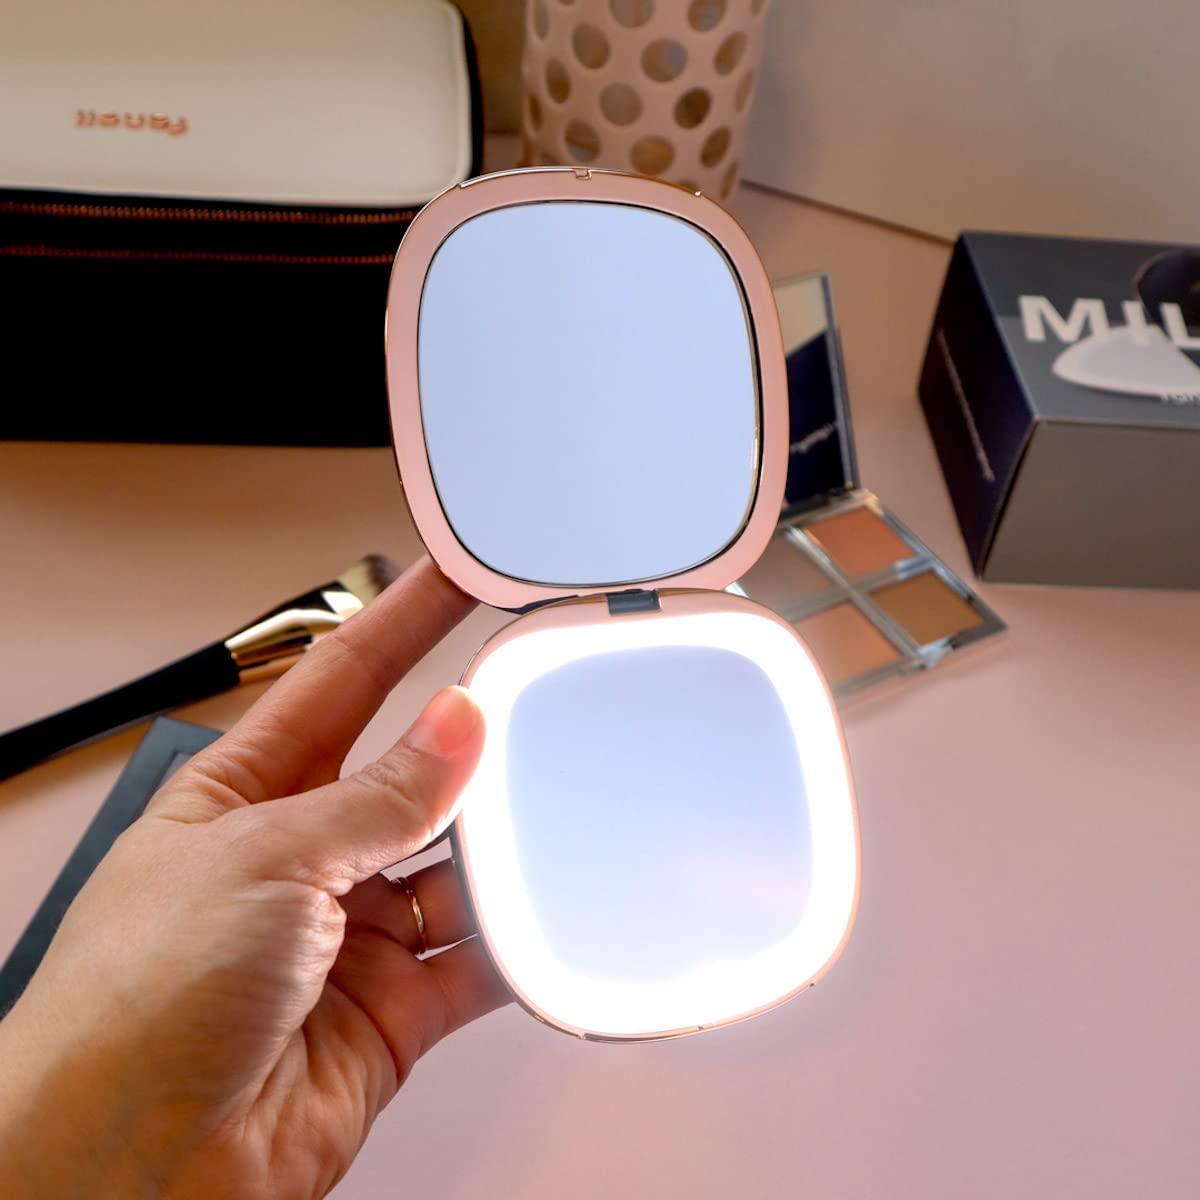 Fancii Compact Makeup Mirror with Natural LED Lights, 1x/ 10x Magnifying -  Rechargeable, Portable, Lighted 4” Hand Mirror for Travel and Purses, Mila  (Indigo Magic)